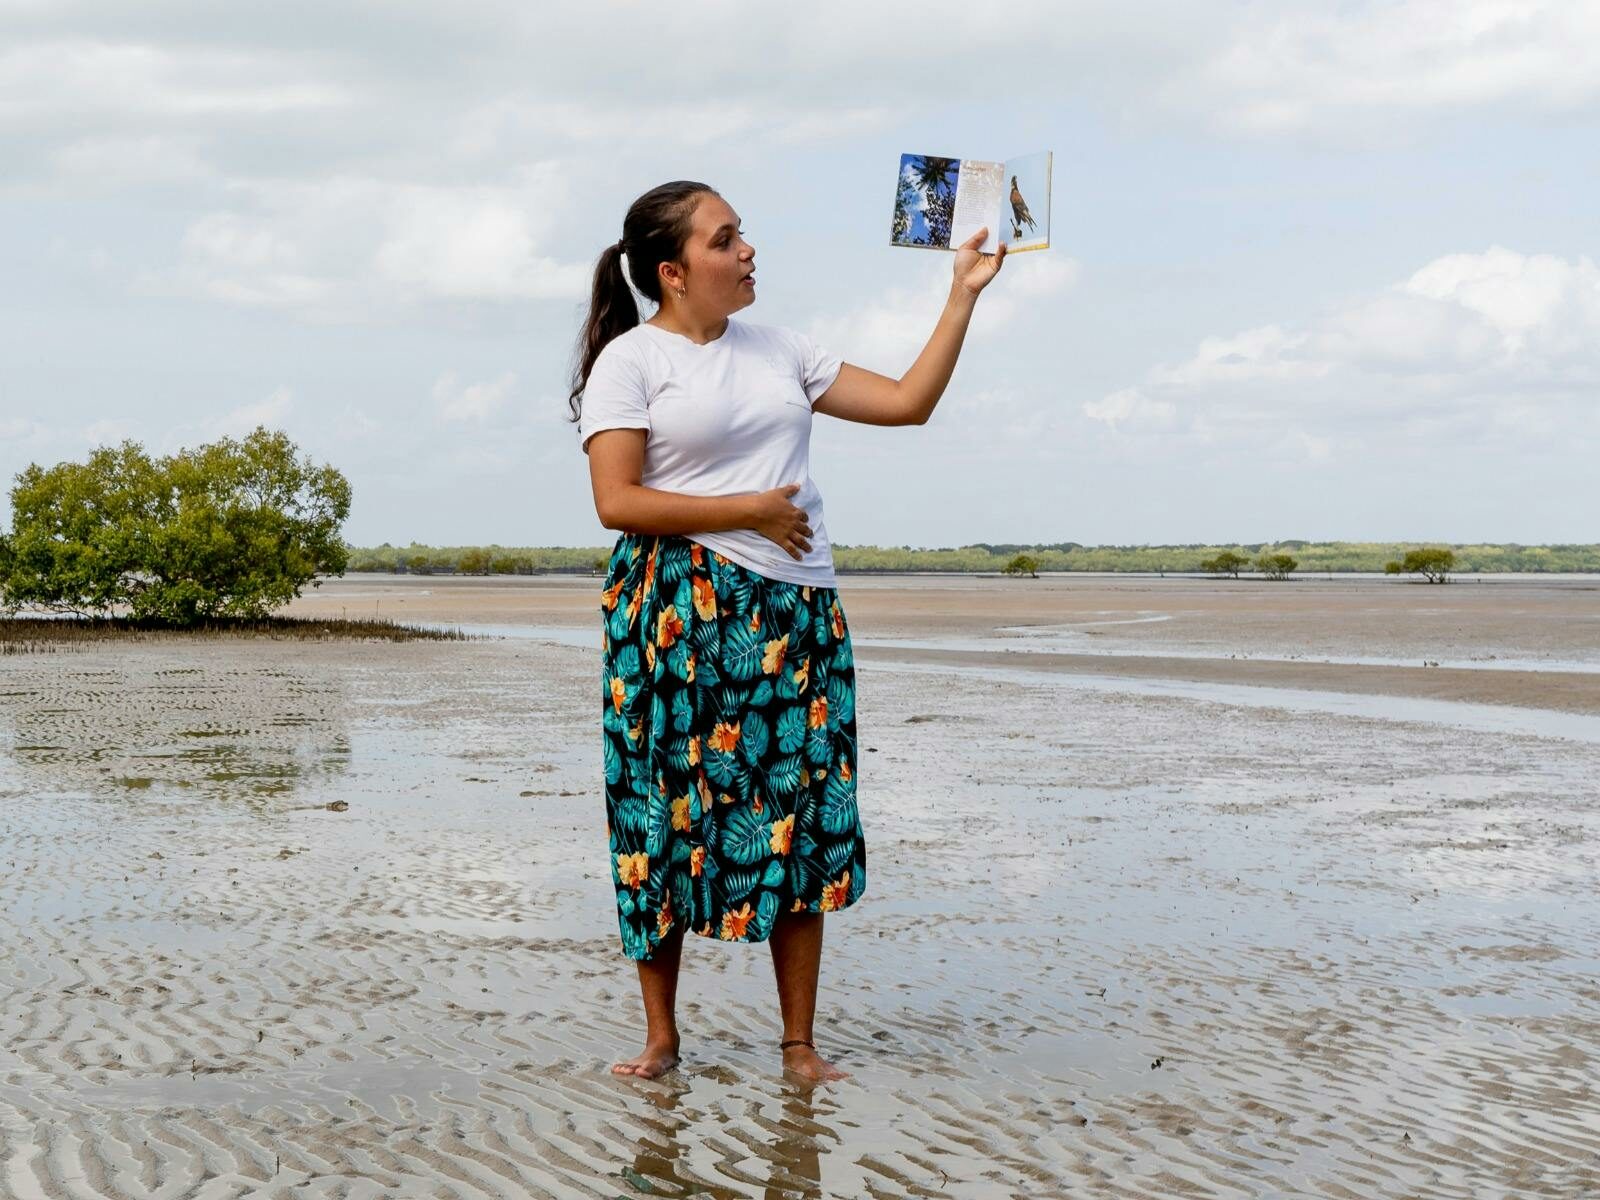 A woman examines a photo while standing on a muddy shore with rippled patterns, wearing a white top